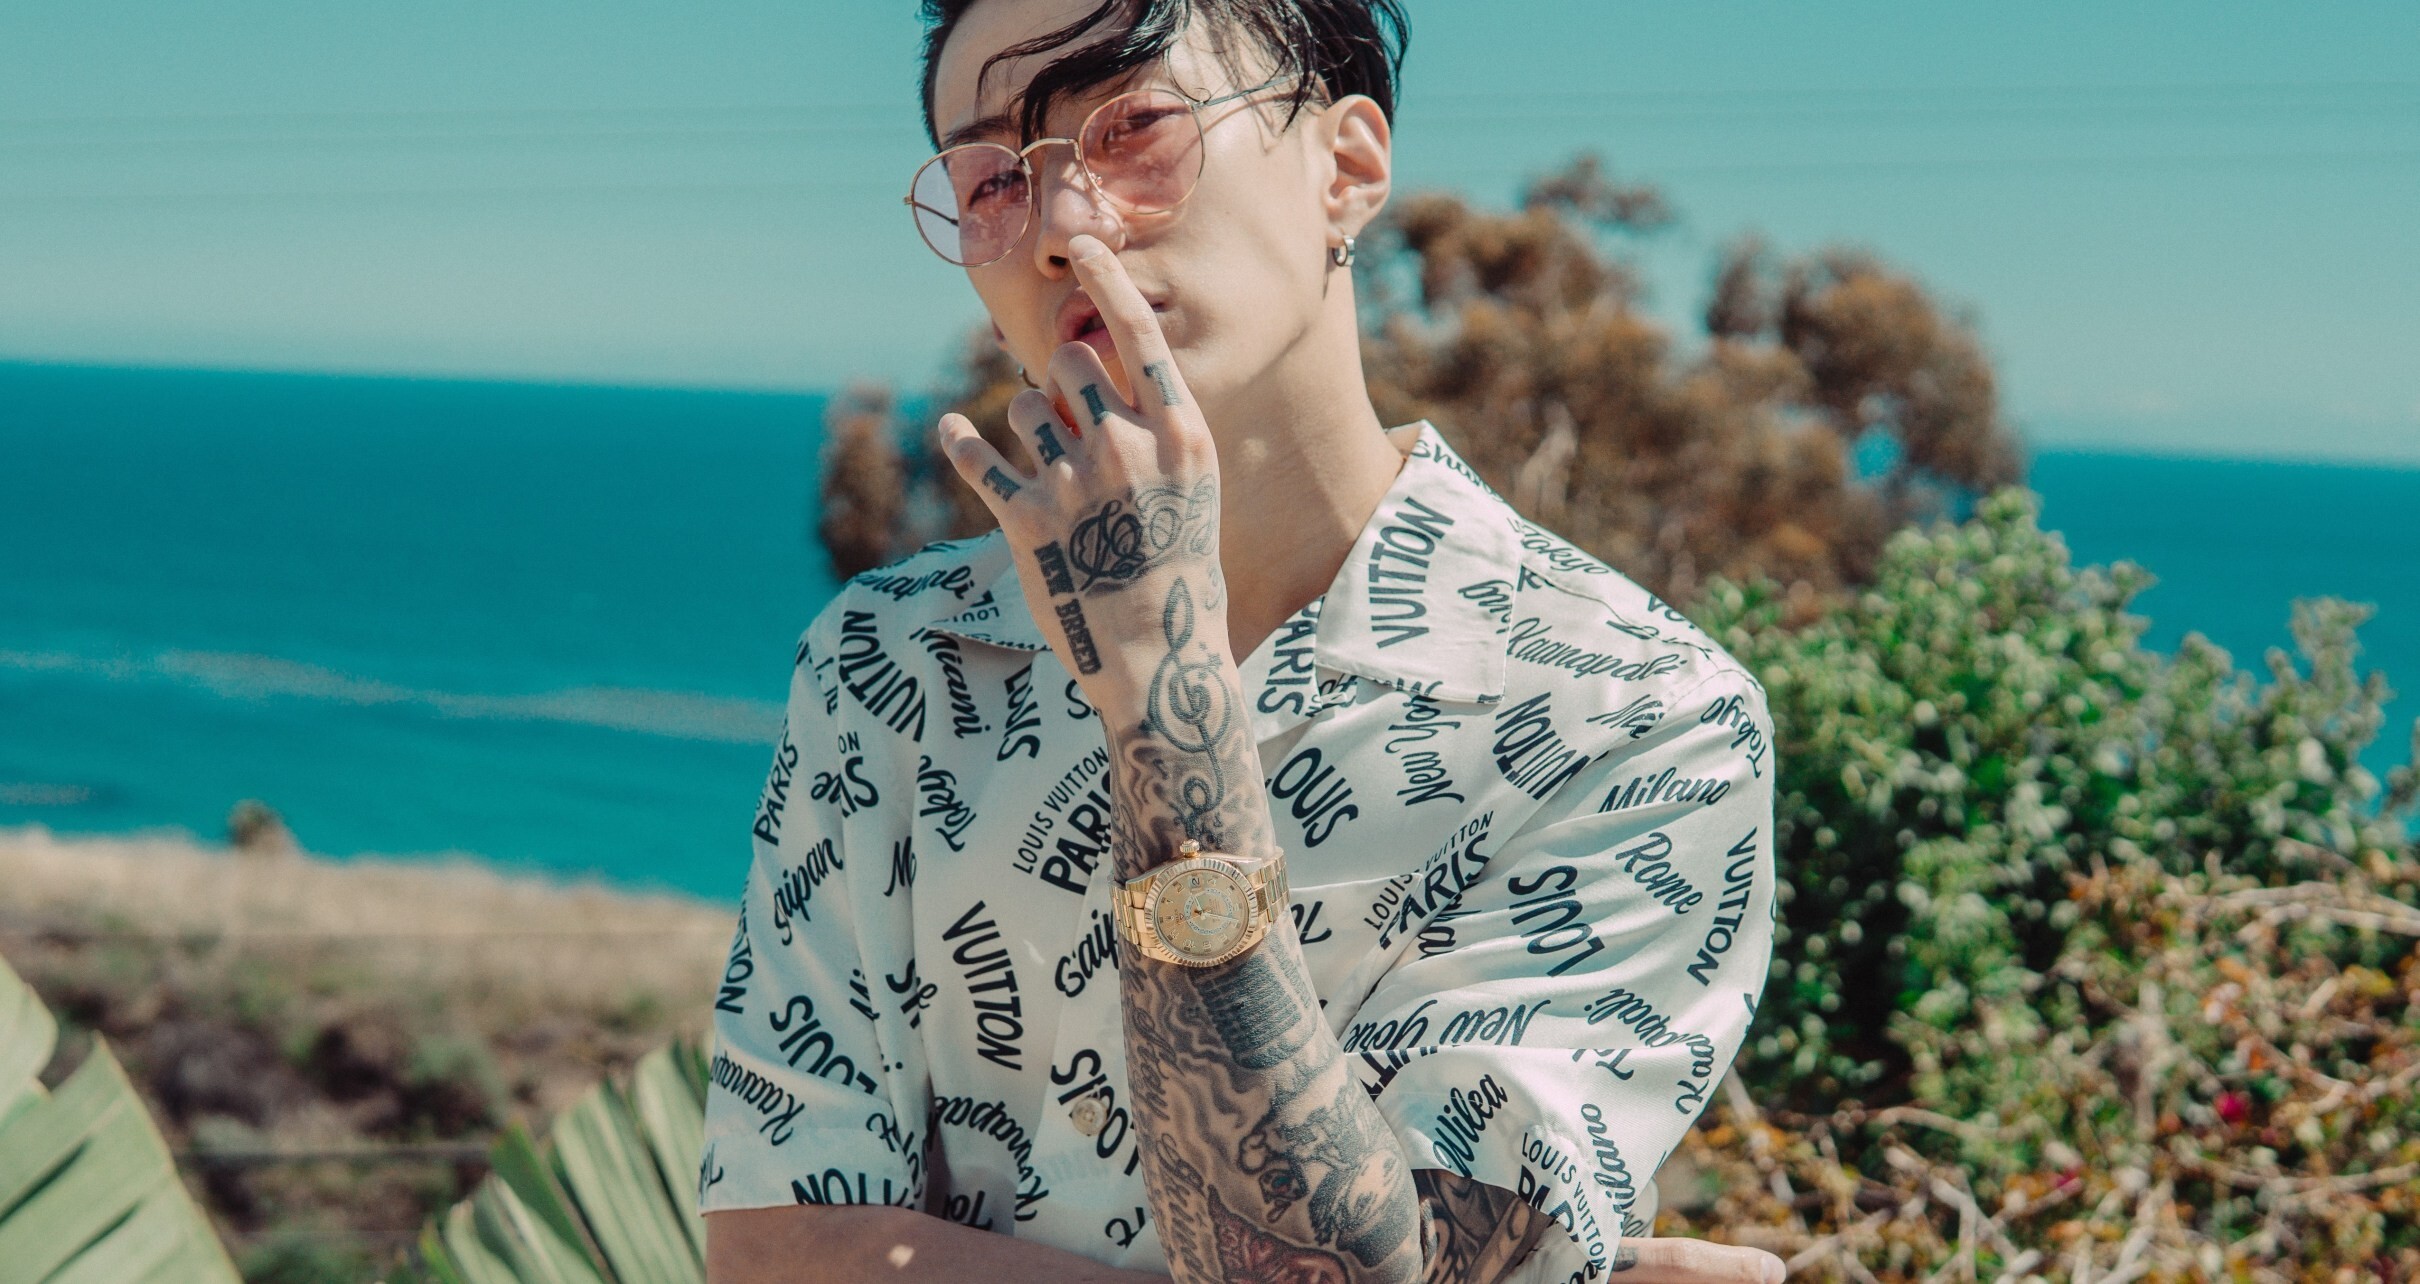 South Korean rapper Jay Park is just one of many Asian artists who have voiced their support for the Black Lives Matter campaign as well as donating funds to help raise awareness.